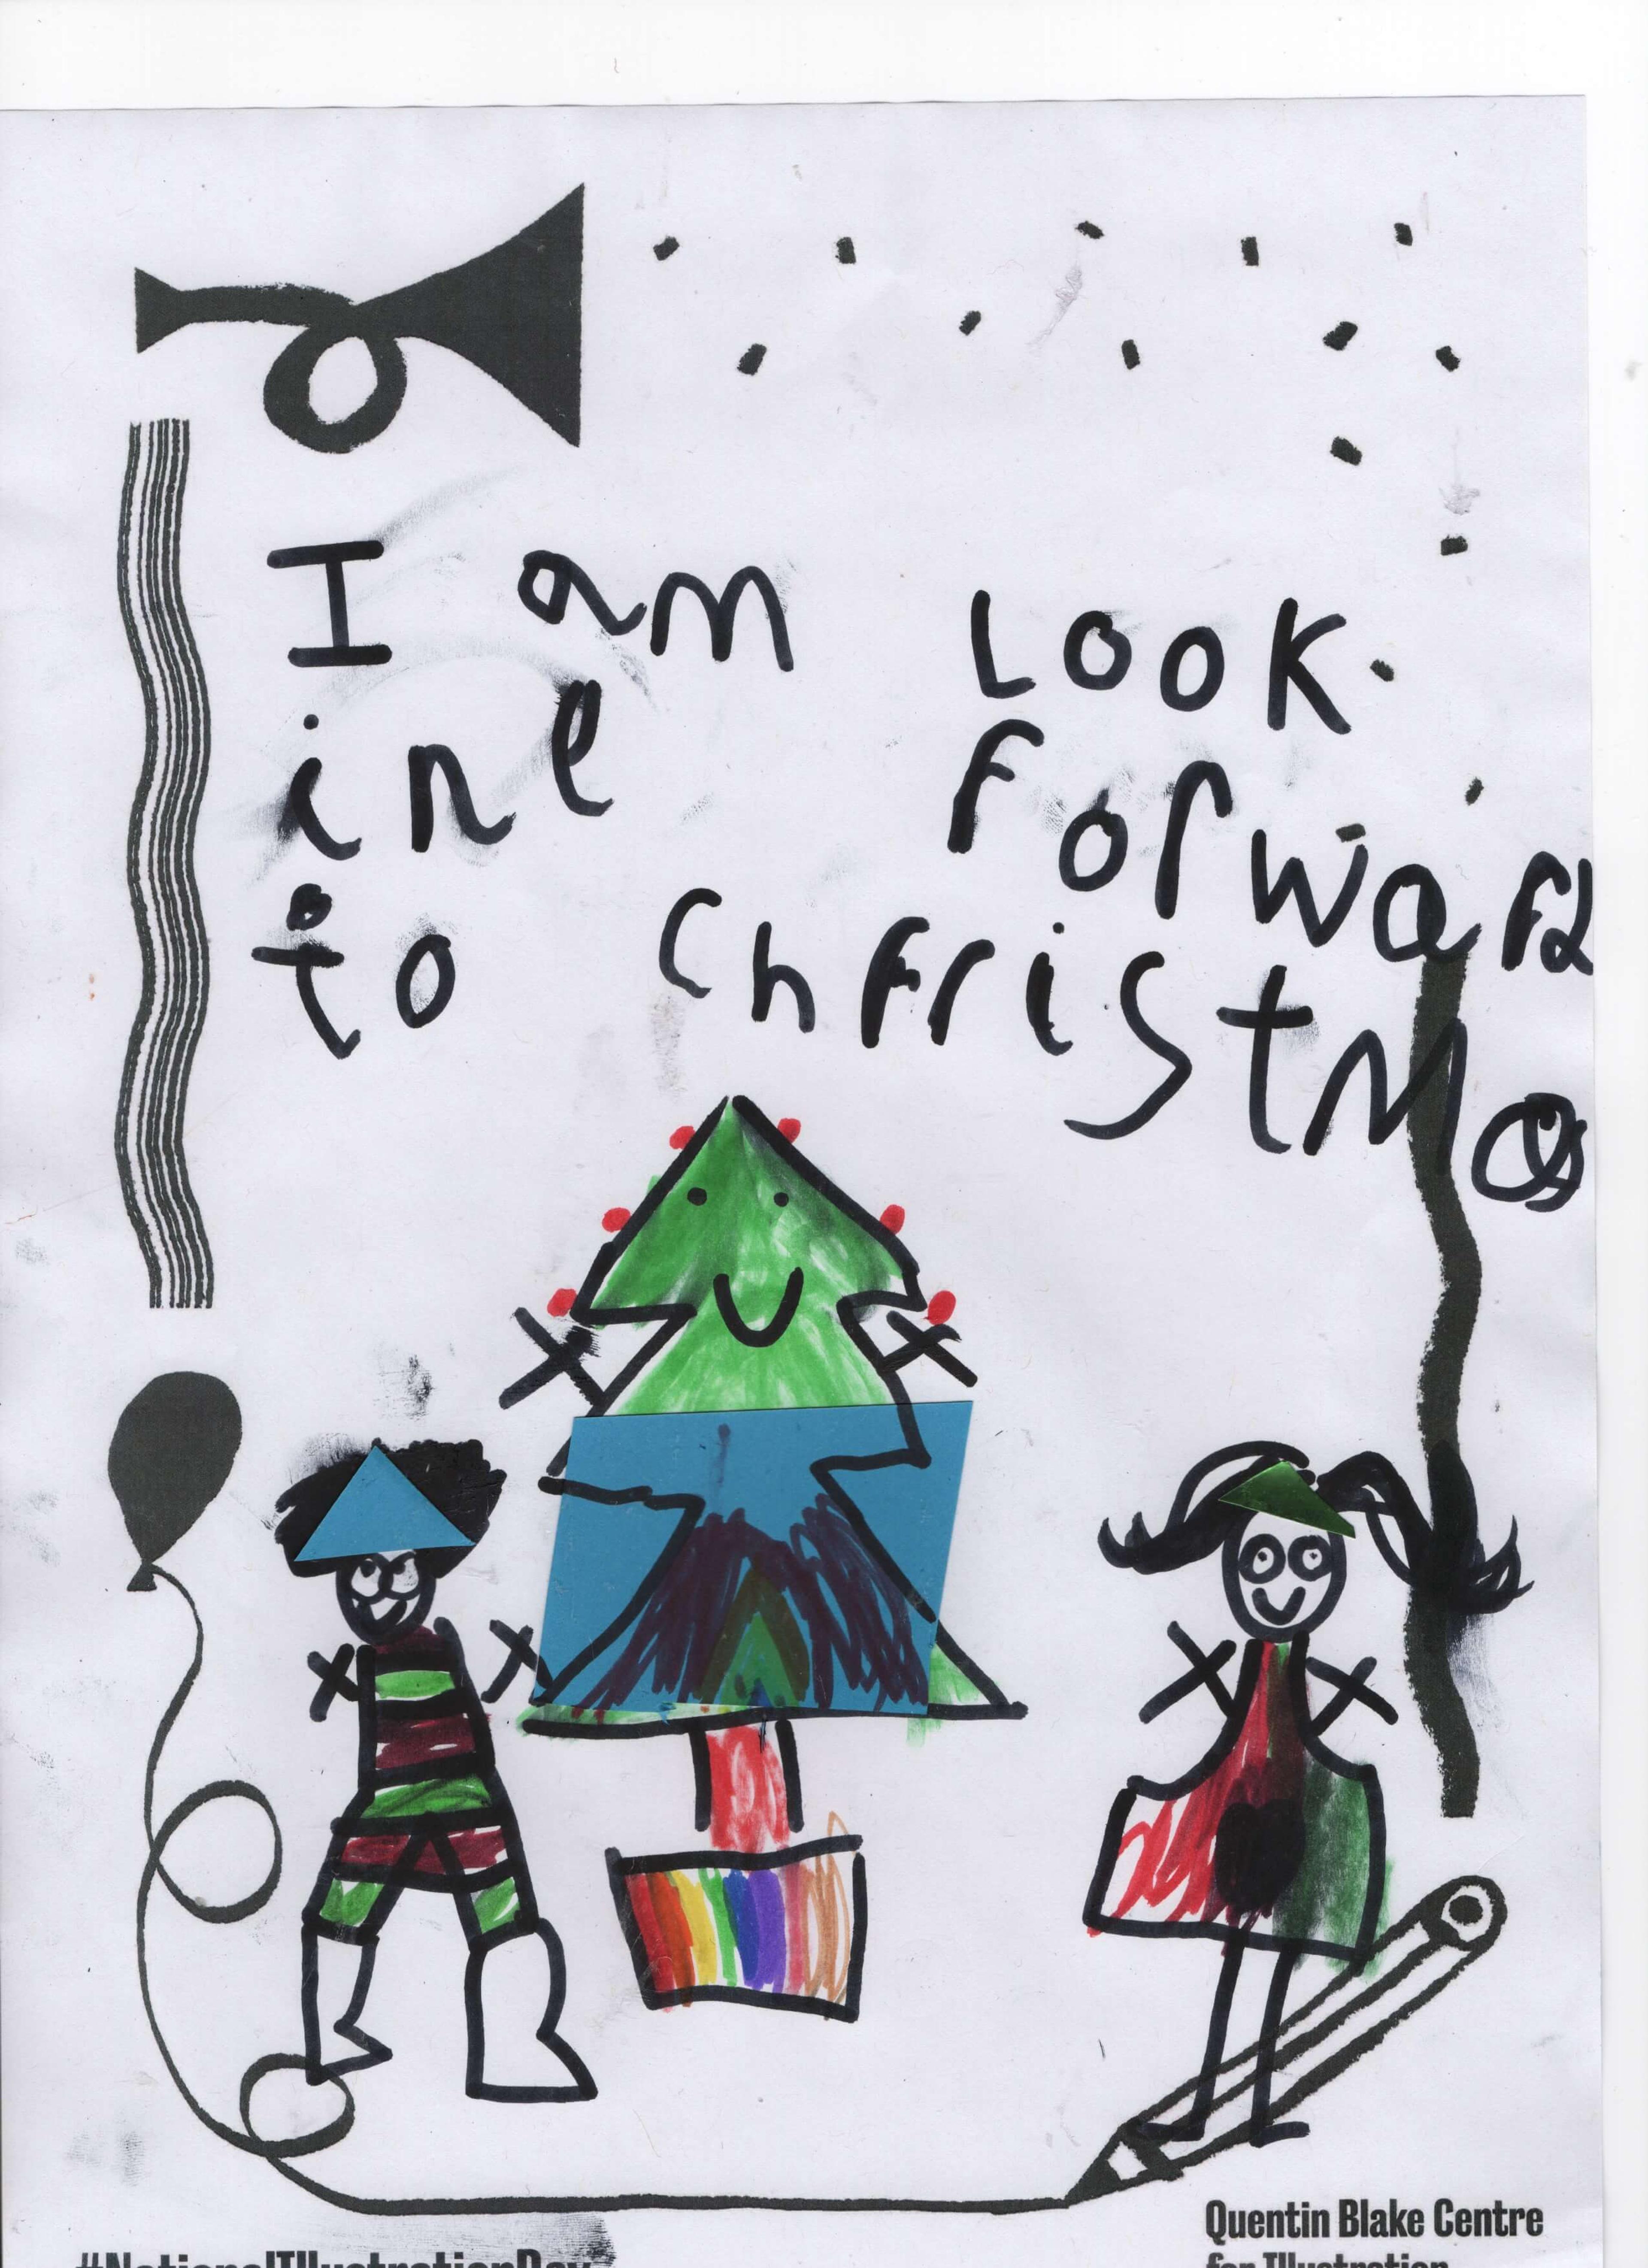 A joyful marker drawing of two children and a Christmas tree. The picture includes the phrase "I am looking forward to Christmas" in a child's handwriting.